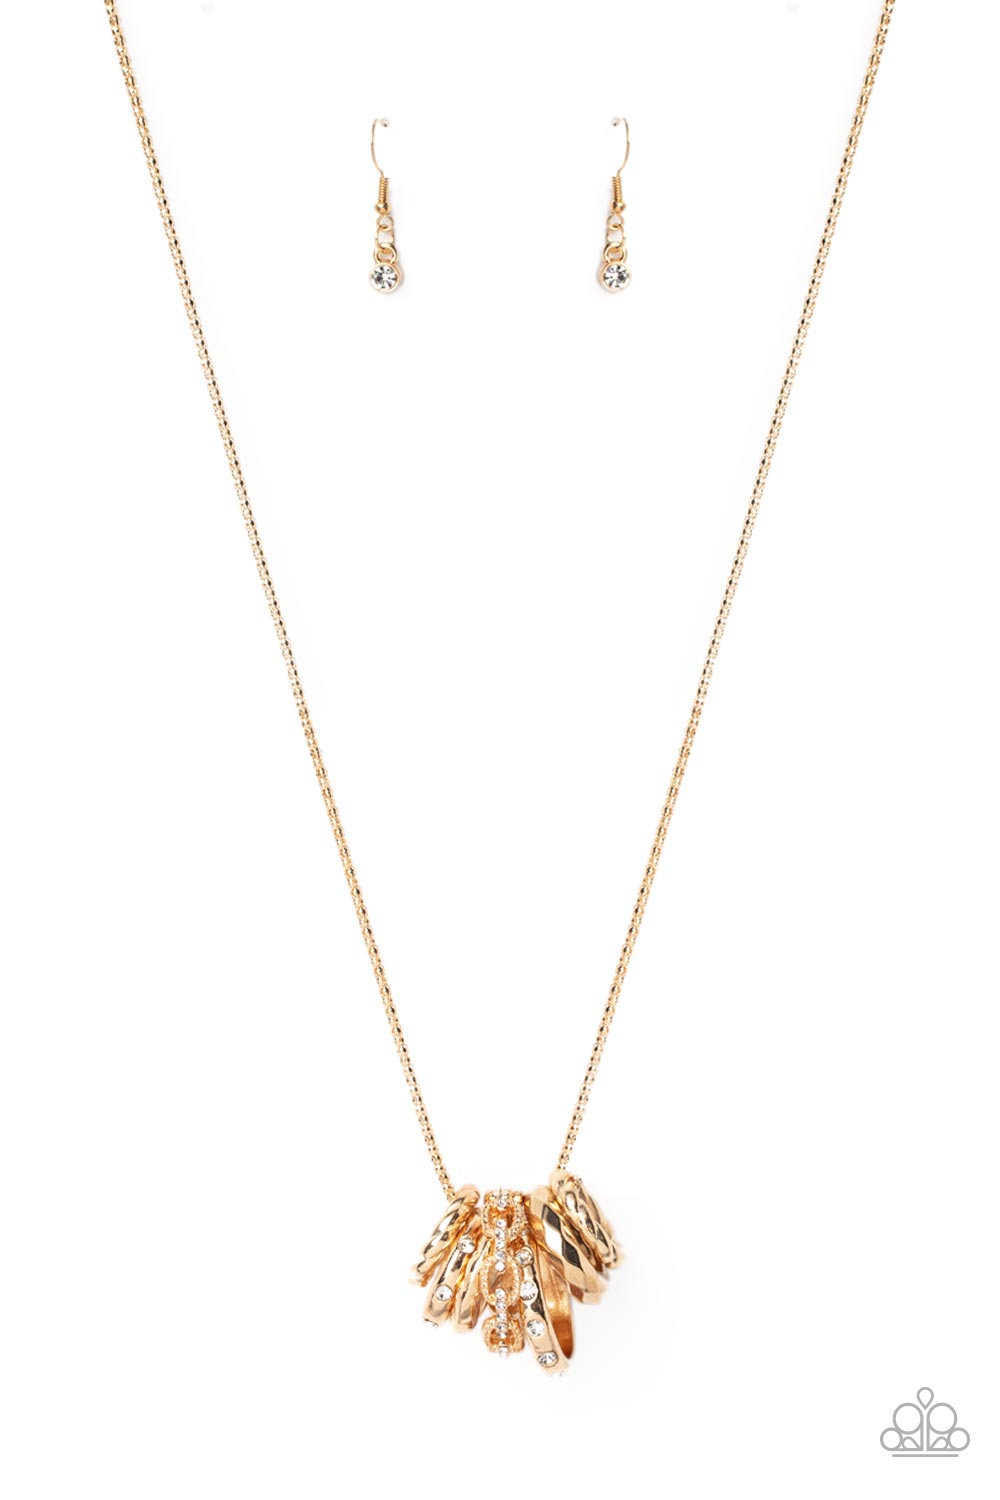 Audacious Attitude Paparazzi Accessories Necklace with Earrings Gold